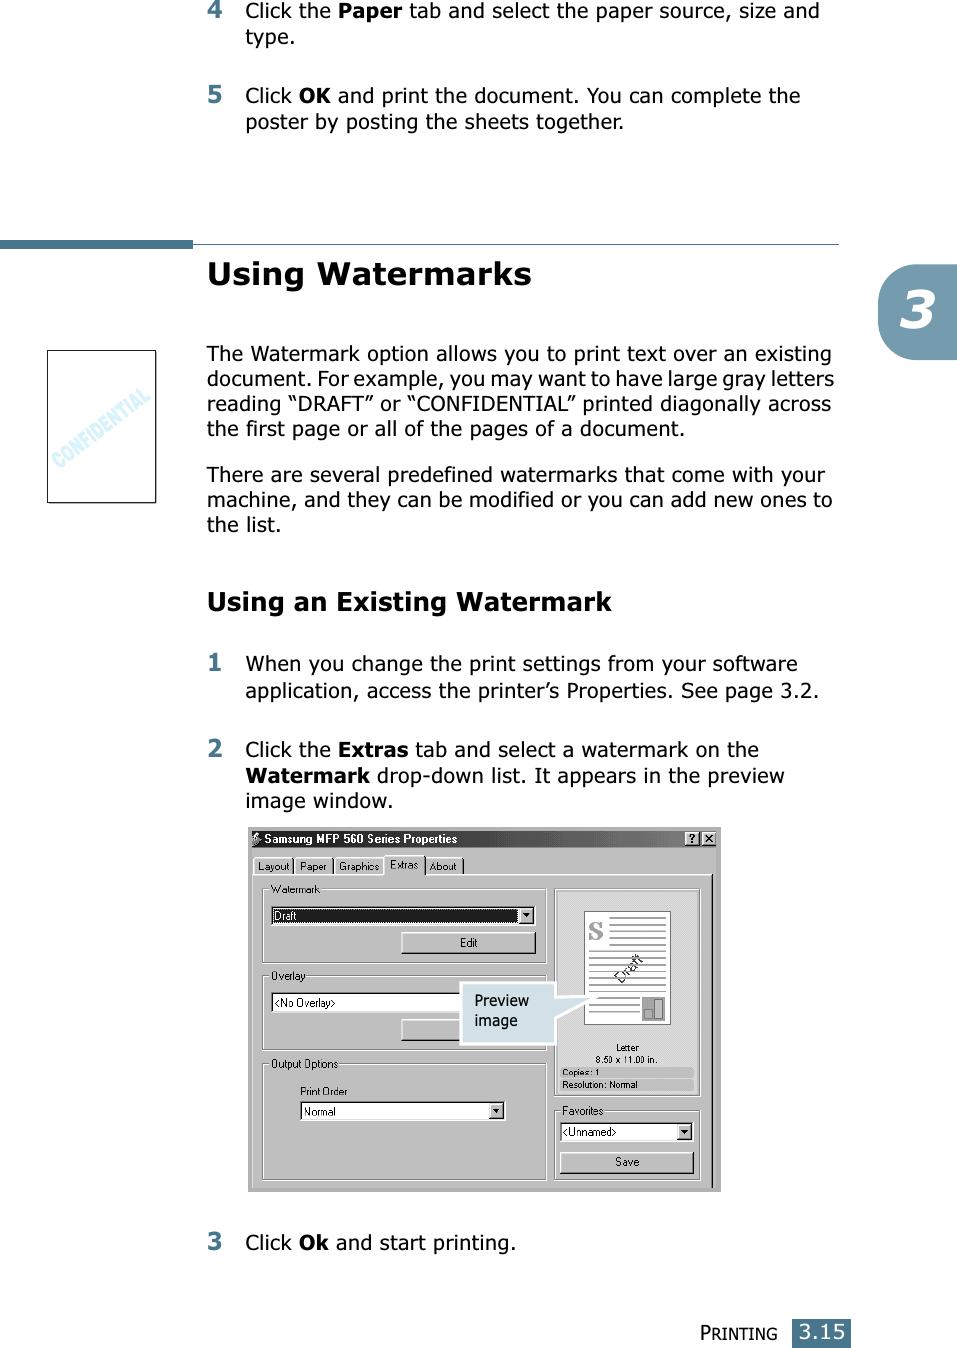 PRINTING3.1534Click the Paper tab and select the paper source, size and type.5Click OK and print the document. You can complete the poster by posting the sheets together. Using WatermarksThe Watermark option allows you to print text over an existing document. For example, you may want to have large gray letters reading “DRAFT” or “CONFIDENTIAL” printed diagonally across the first page or all of the pages of a document. There are several predefined watermarks that come with your machine, and they can be modified or you can add new ones to the list. Using an Existing Watermark1When you change the print settings from your software application, access the printer’s Properties. See page 3.2. 2Click the Extras tab and select a watermark on the Watermark drop-down list. It appears in the preview image window. 3Click Ok and start printing. Preview image